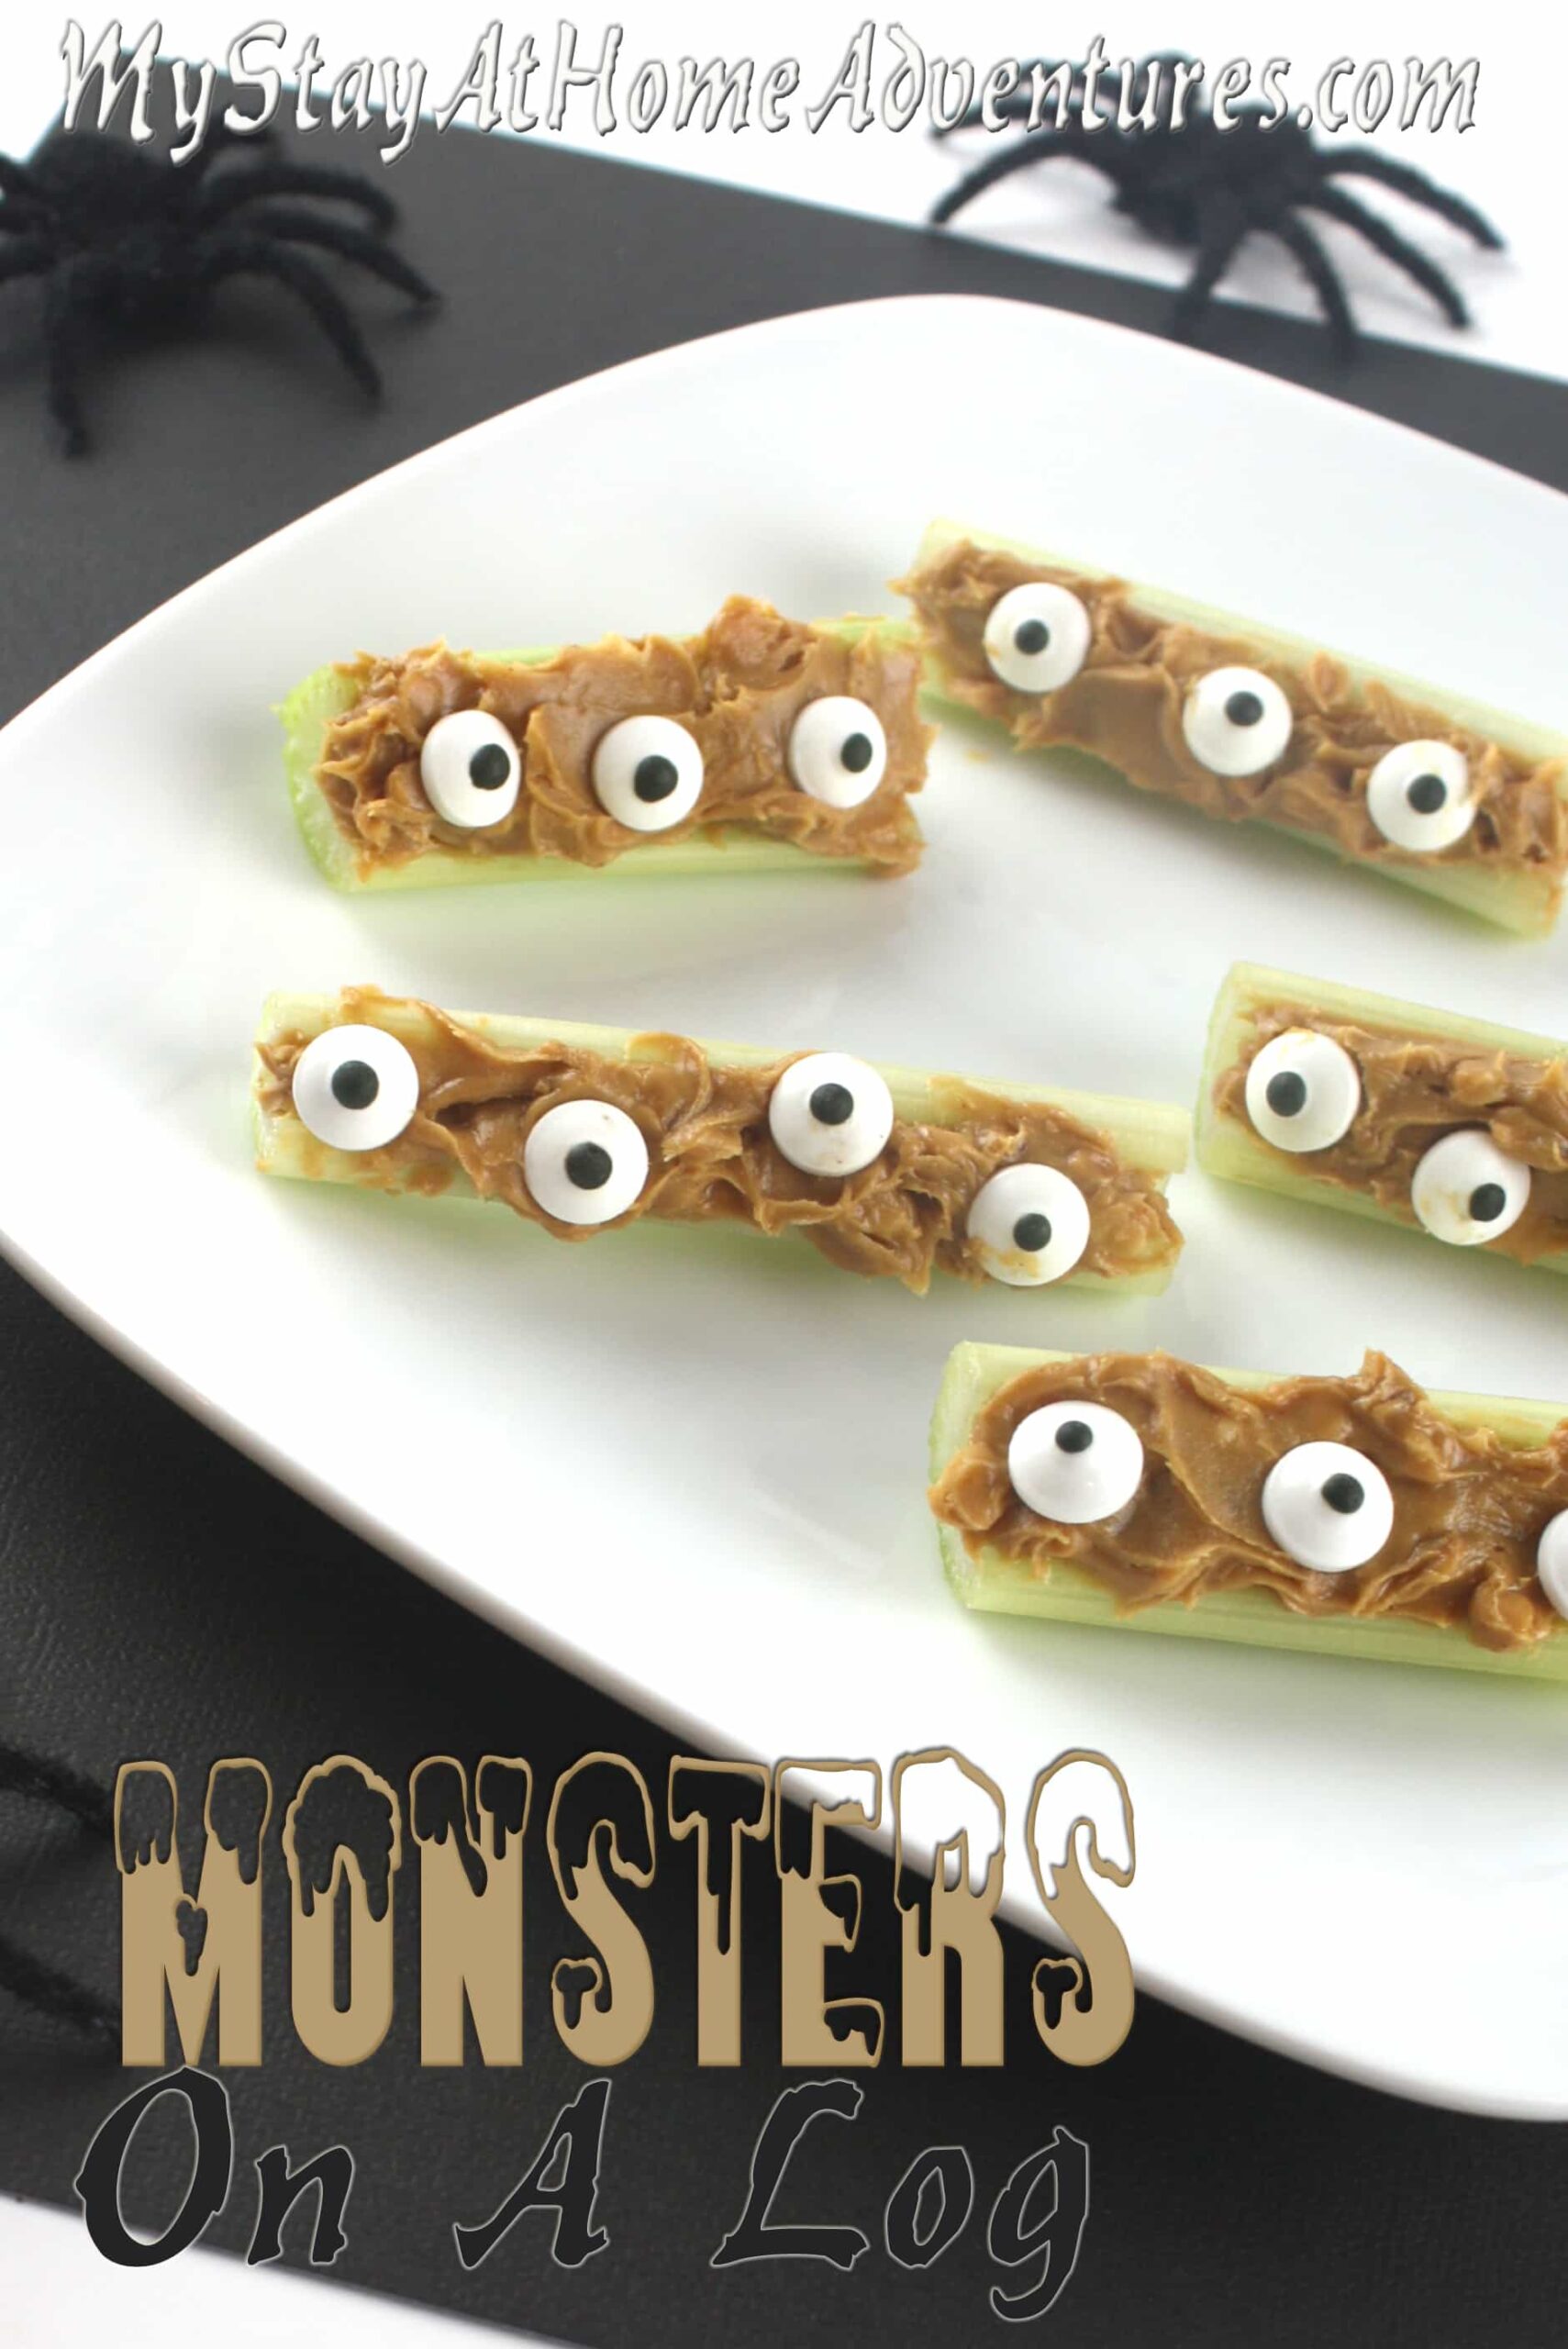 Looking for a Halloween healthy snack? This Monsters on a log recipe will do the trick. Learn how to create them and have fun while eating them. via @mystayathome